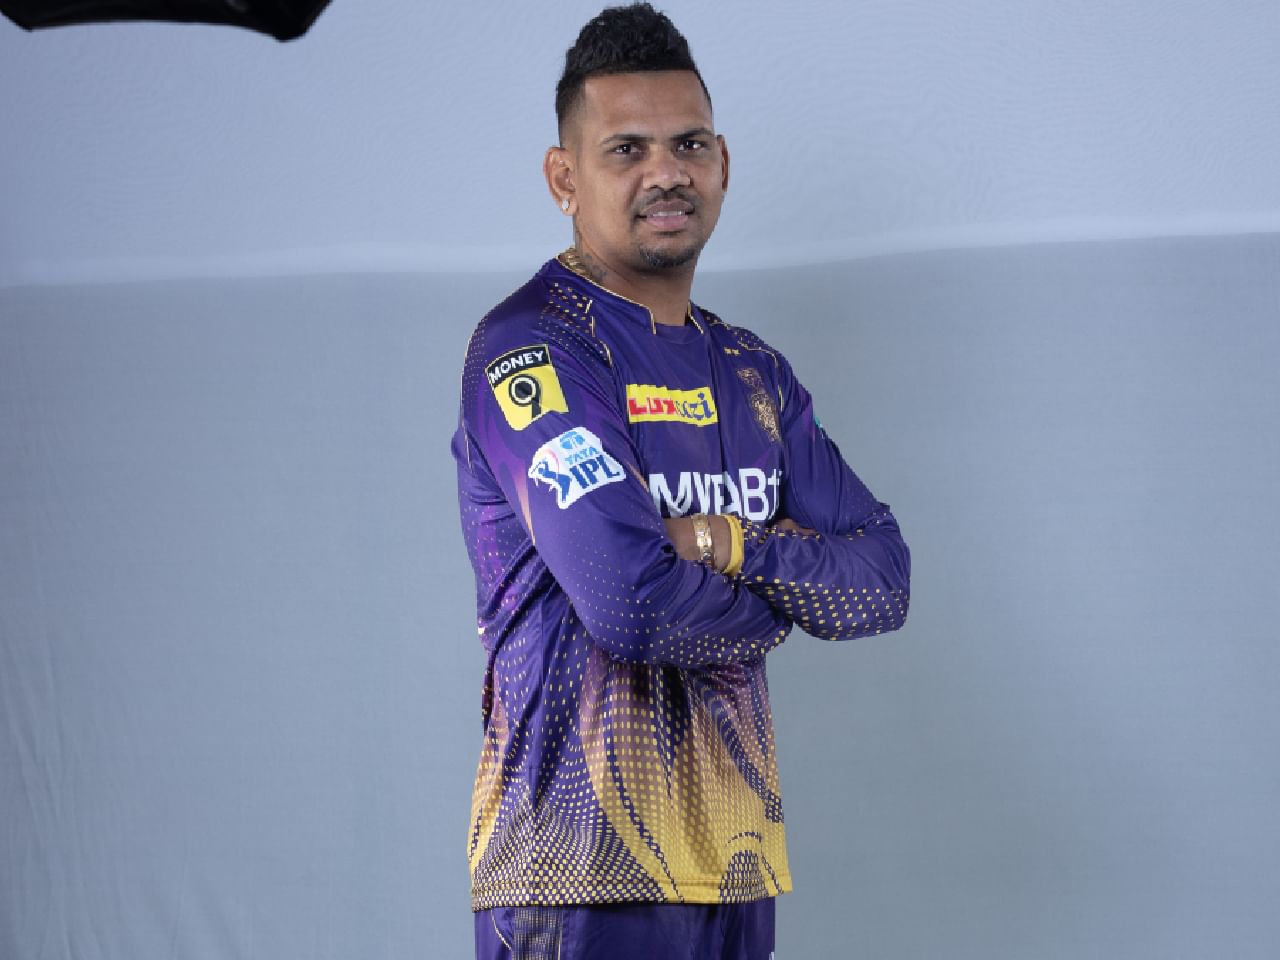 Carrom ball to flippers, KKR spin kingpin Narine gushes over spinners reinventing to dominate T20 format